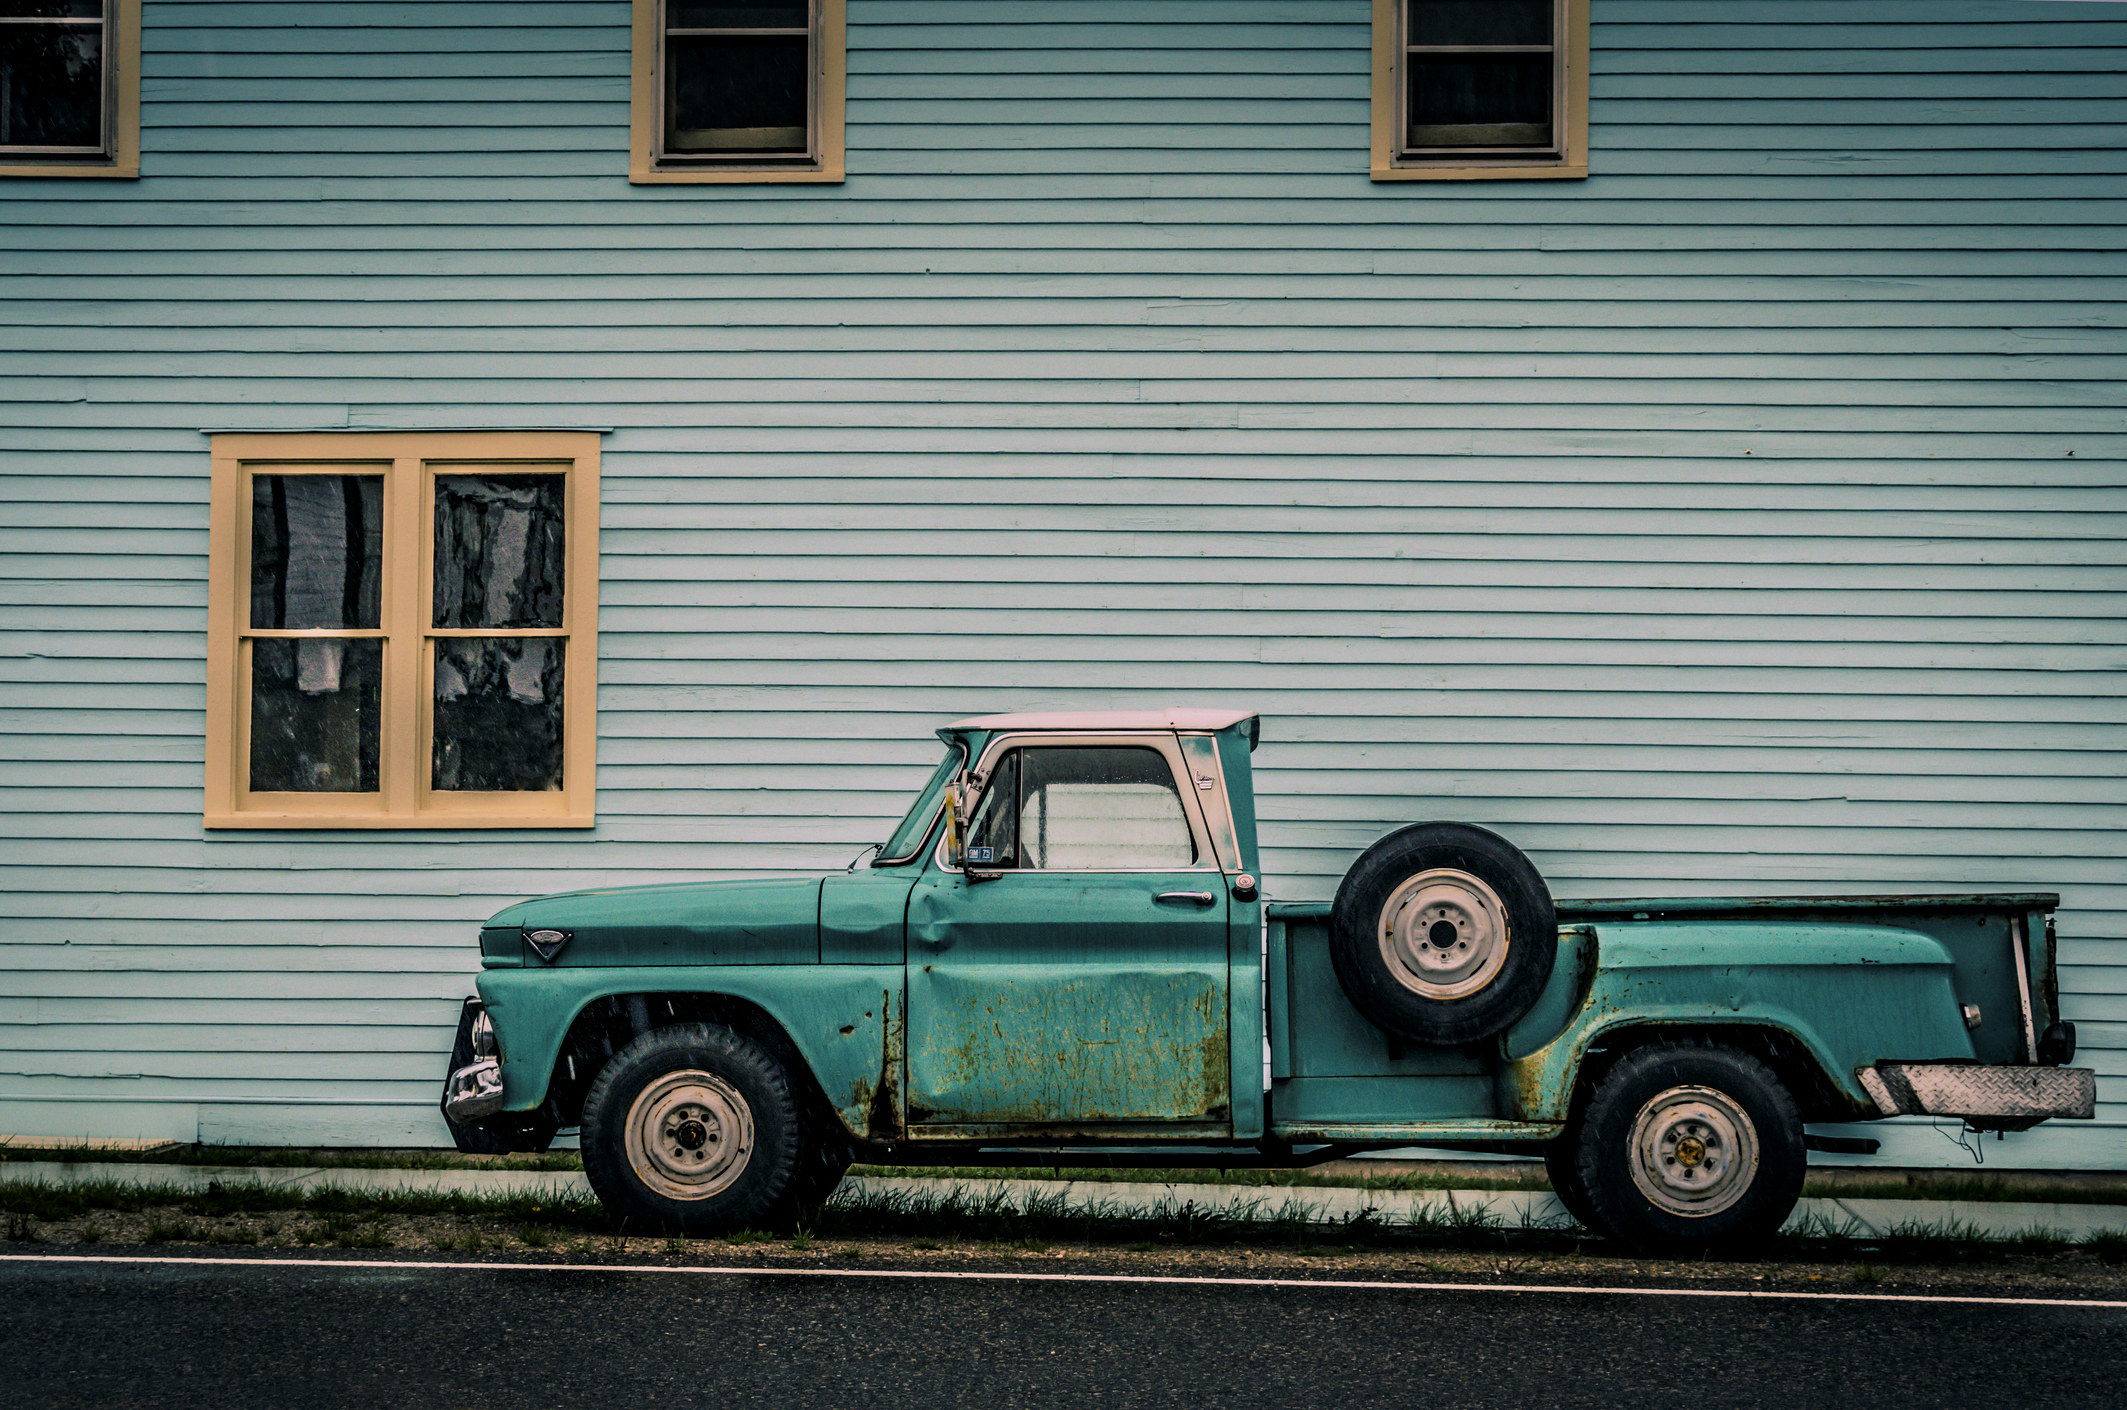 An old pickup truck